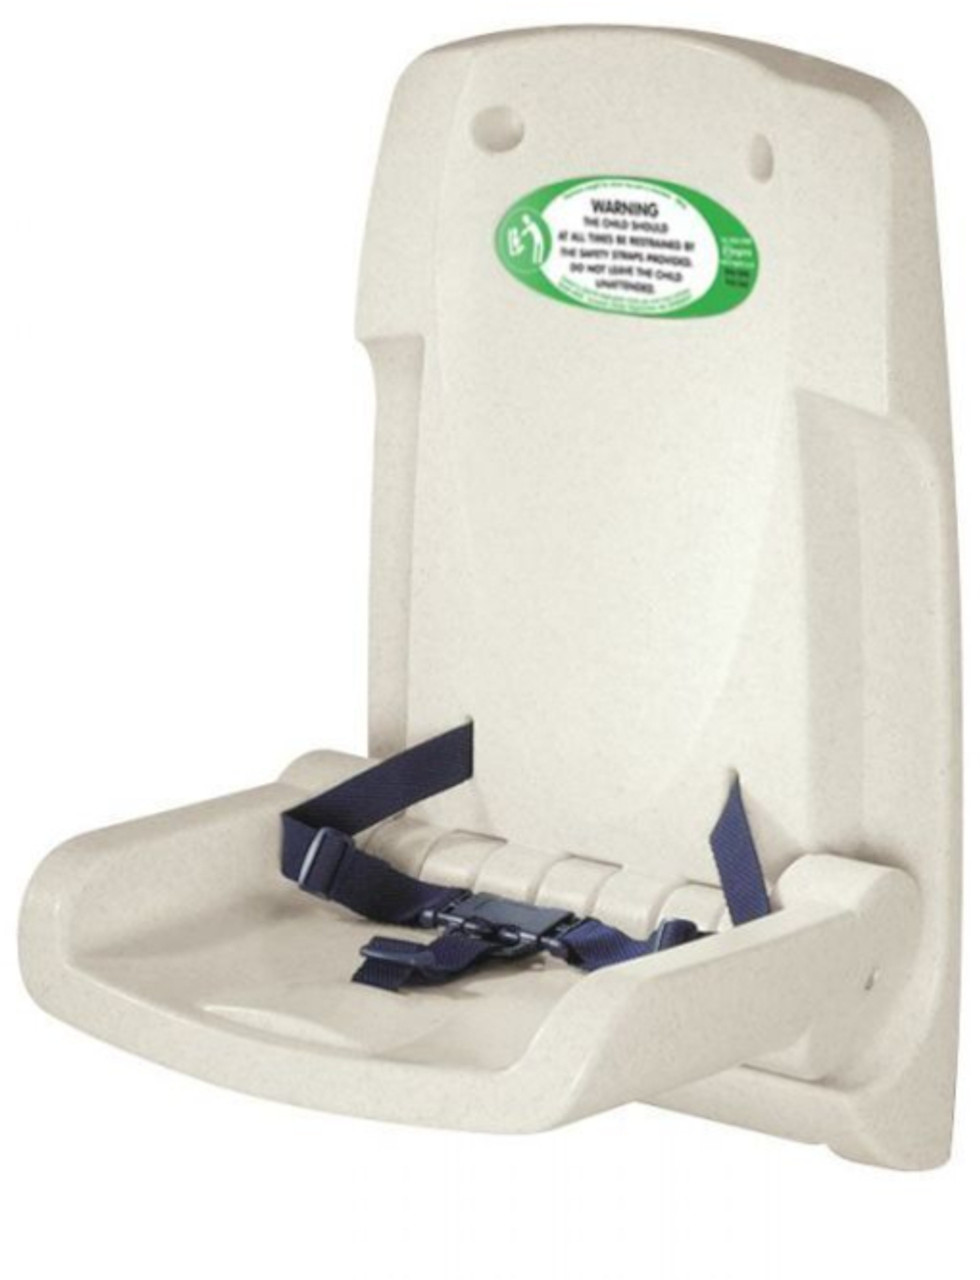 Magrini Stay-Safe Baby Seat - Oatmeal - MX33OAT